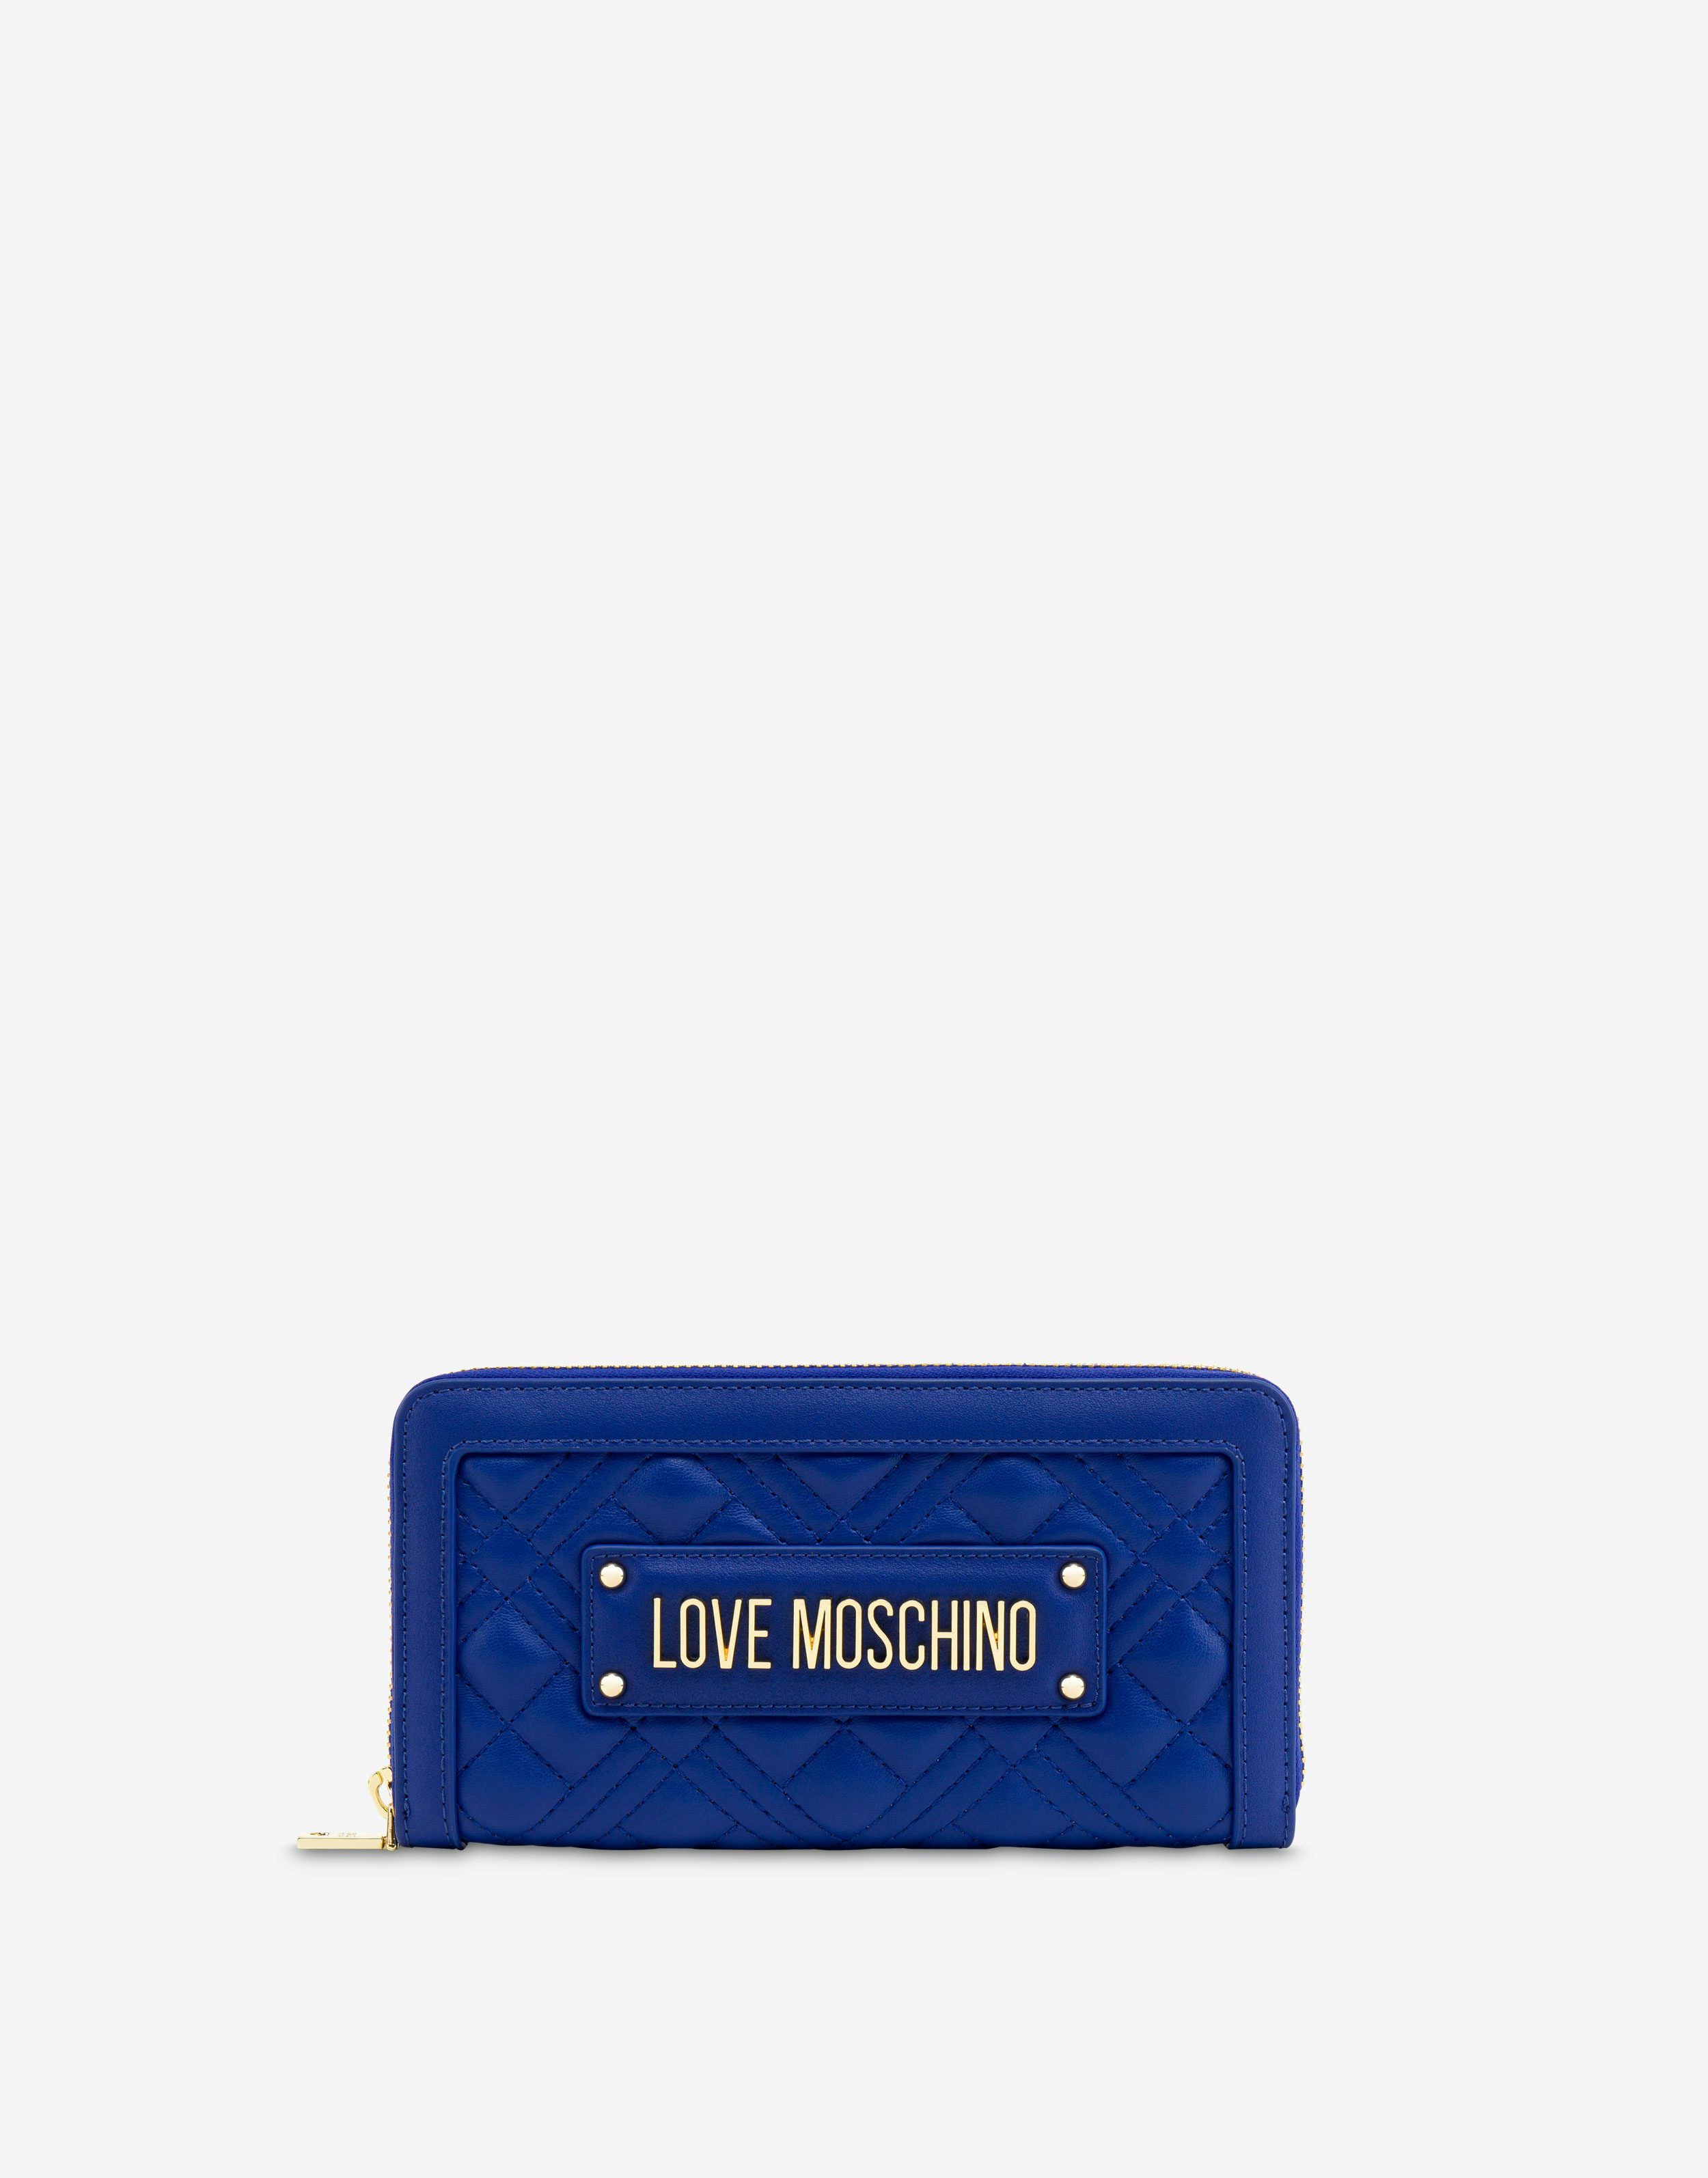 Moschino Official Store